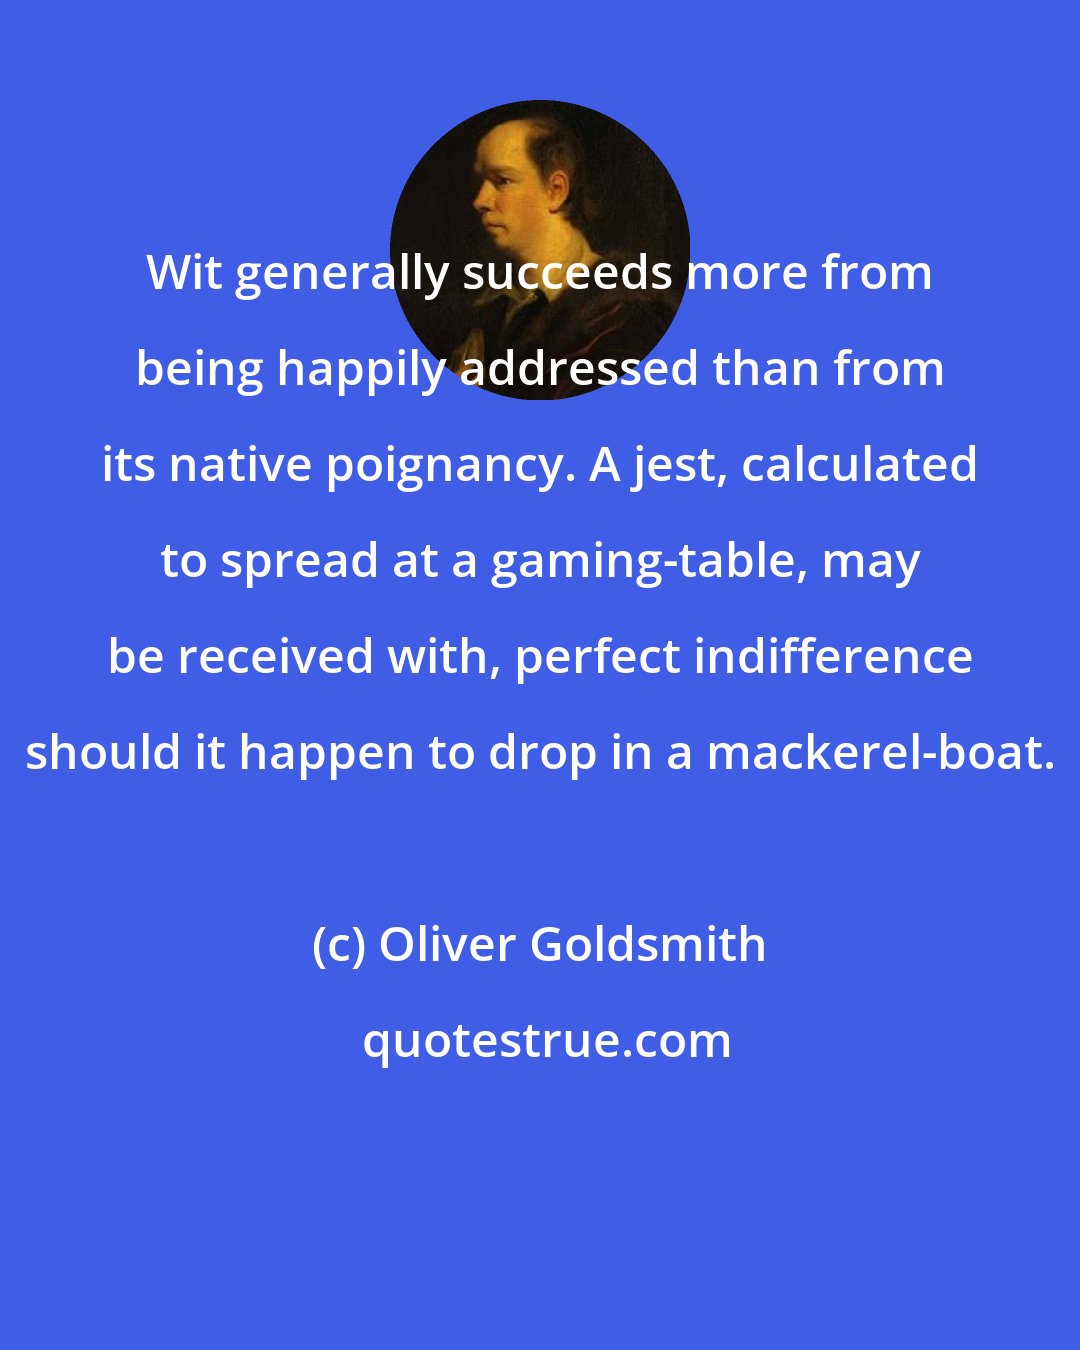 Oliver Goldsmith: Wit generally succeeds more from being happily addressed than from its native poignancy. A jest, calculated to spread at a gaming-table, may be received with, perfect indifference should it happen to drop in a mackerel-boat.